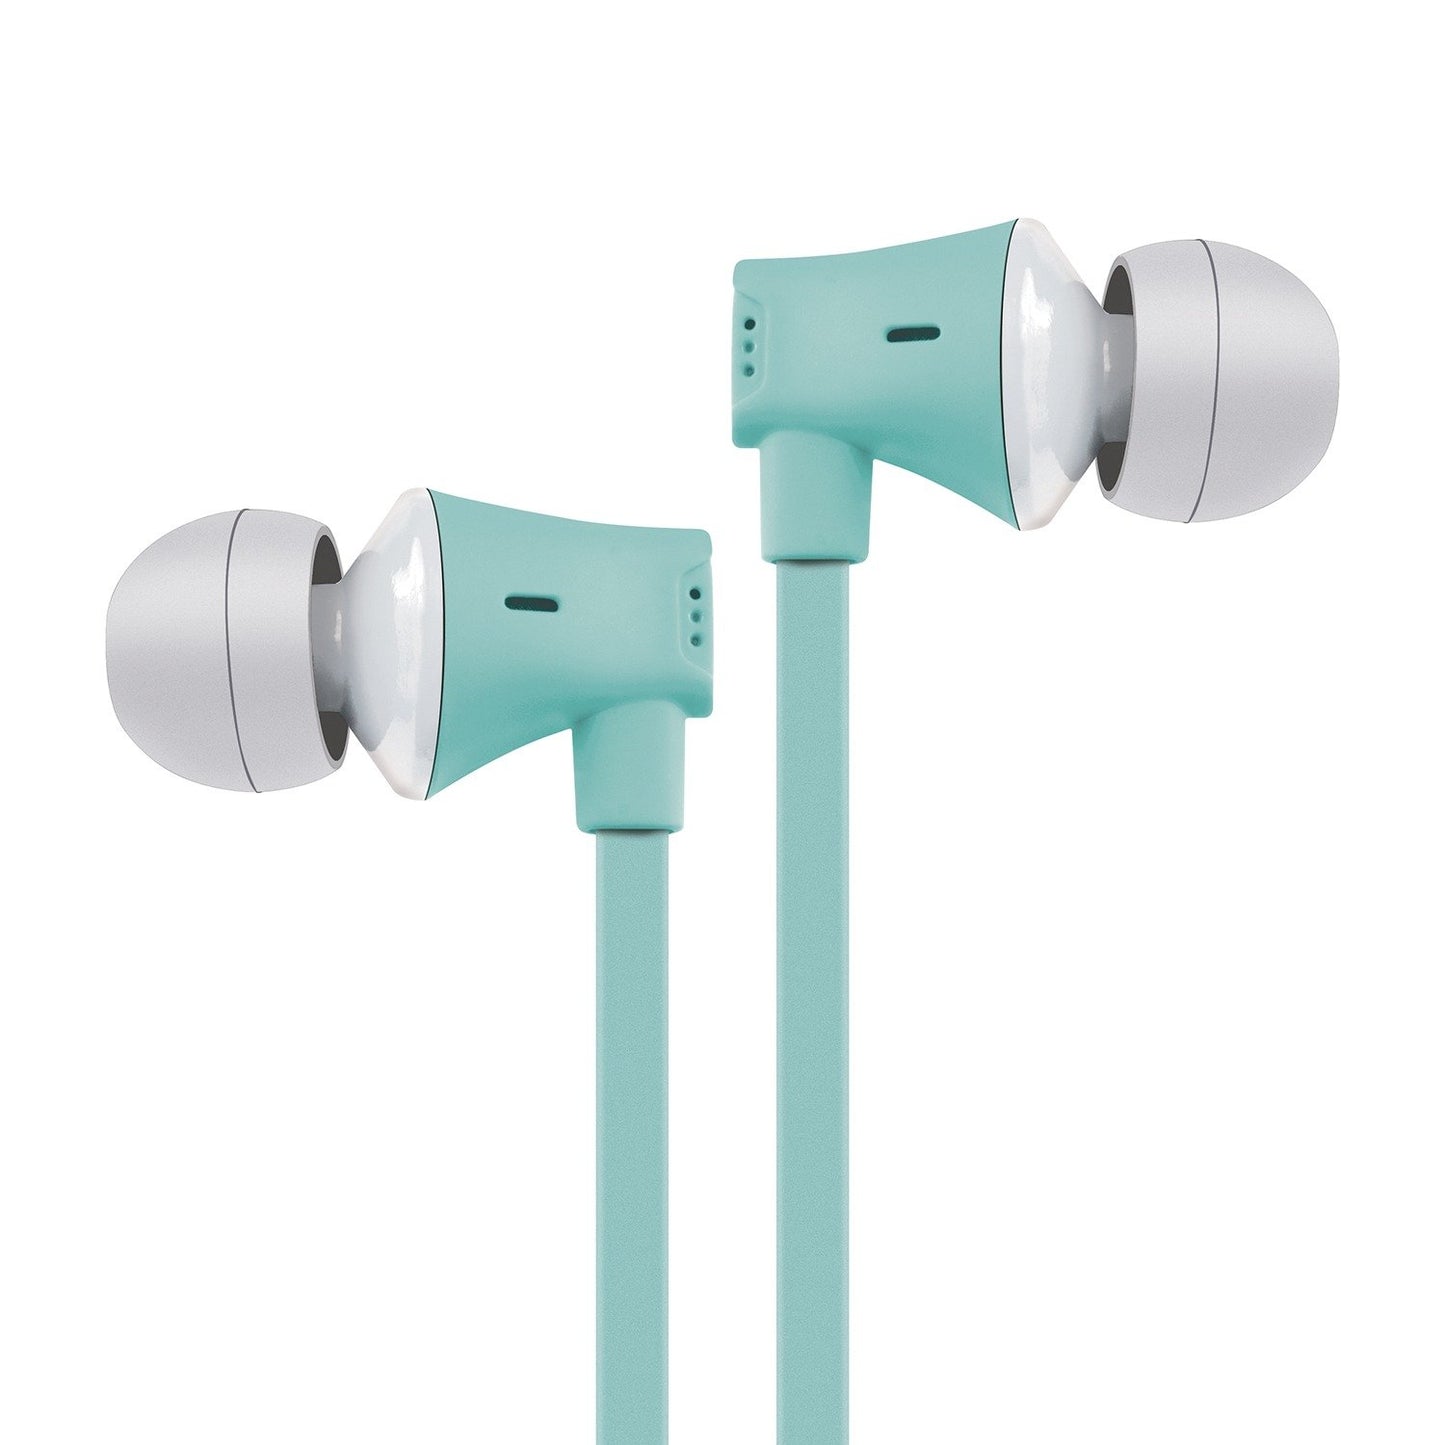 AT&T  EBM03-SEA JIVE Noise Isolating Earbuds w/In-line Microphone (Seafoam)